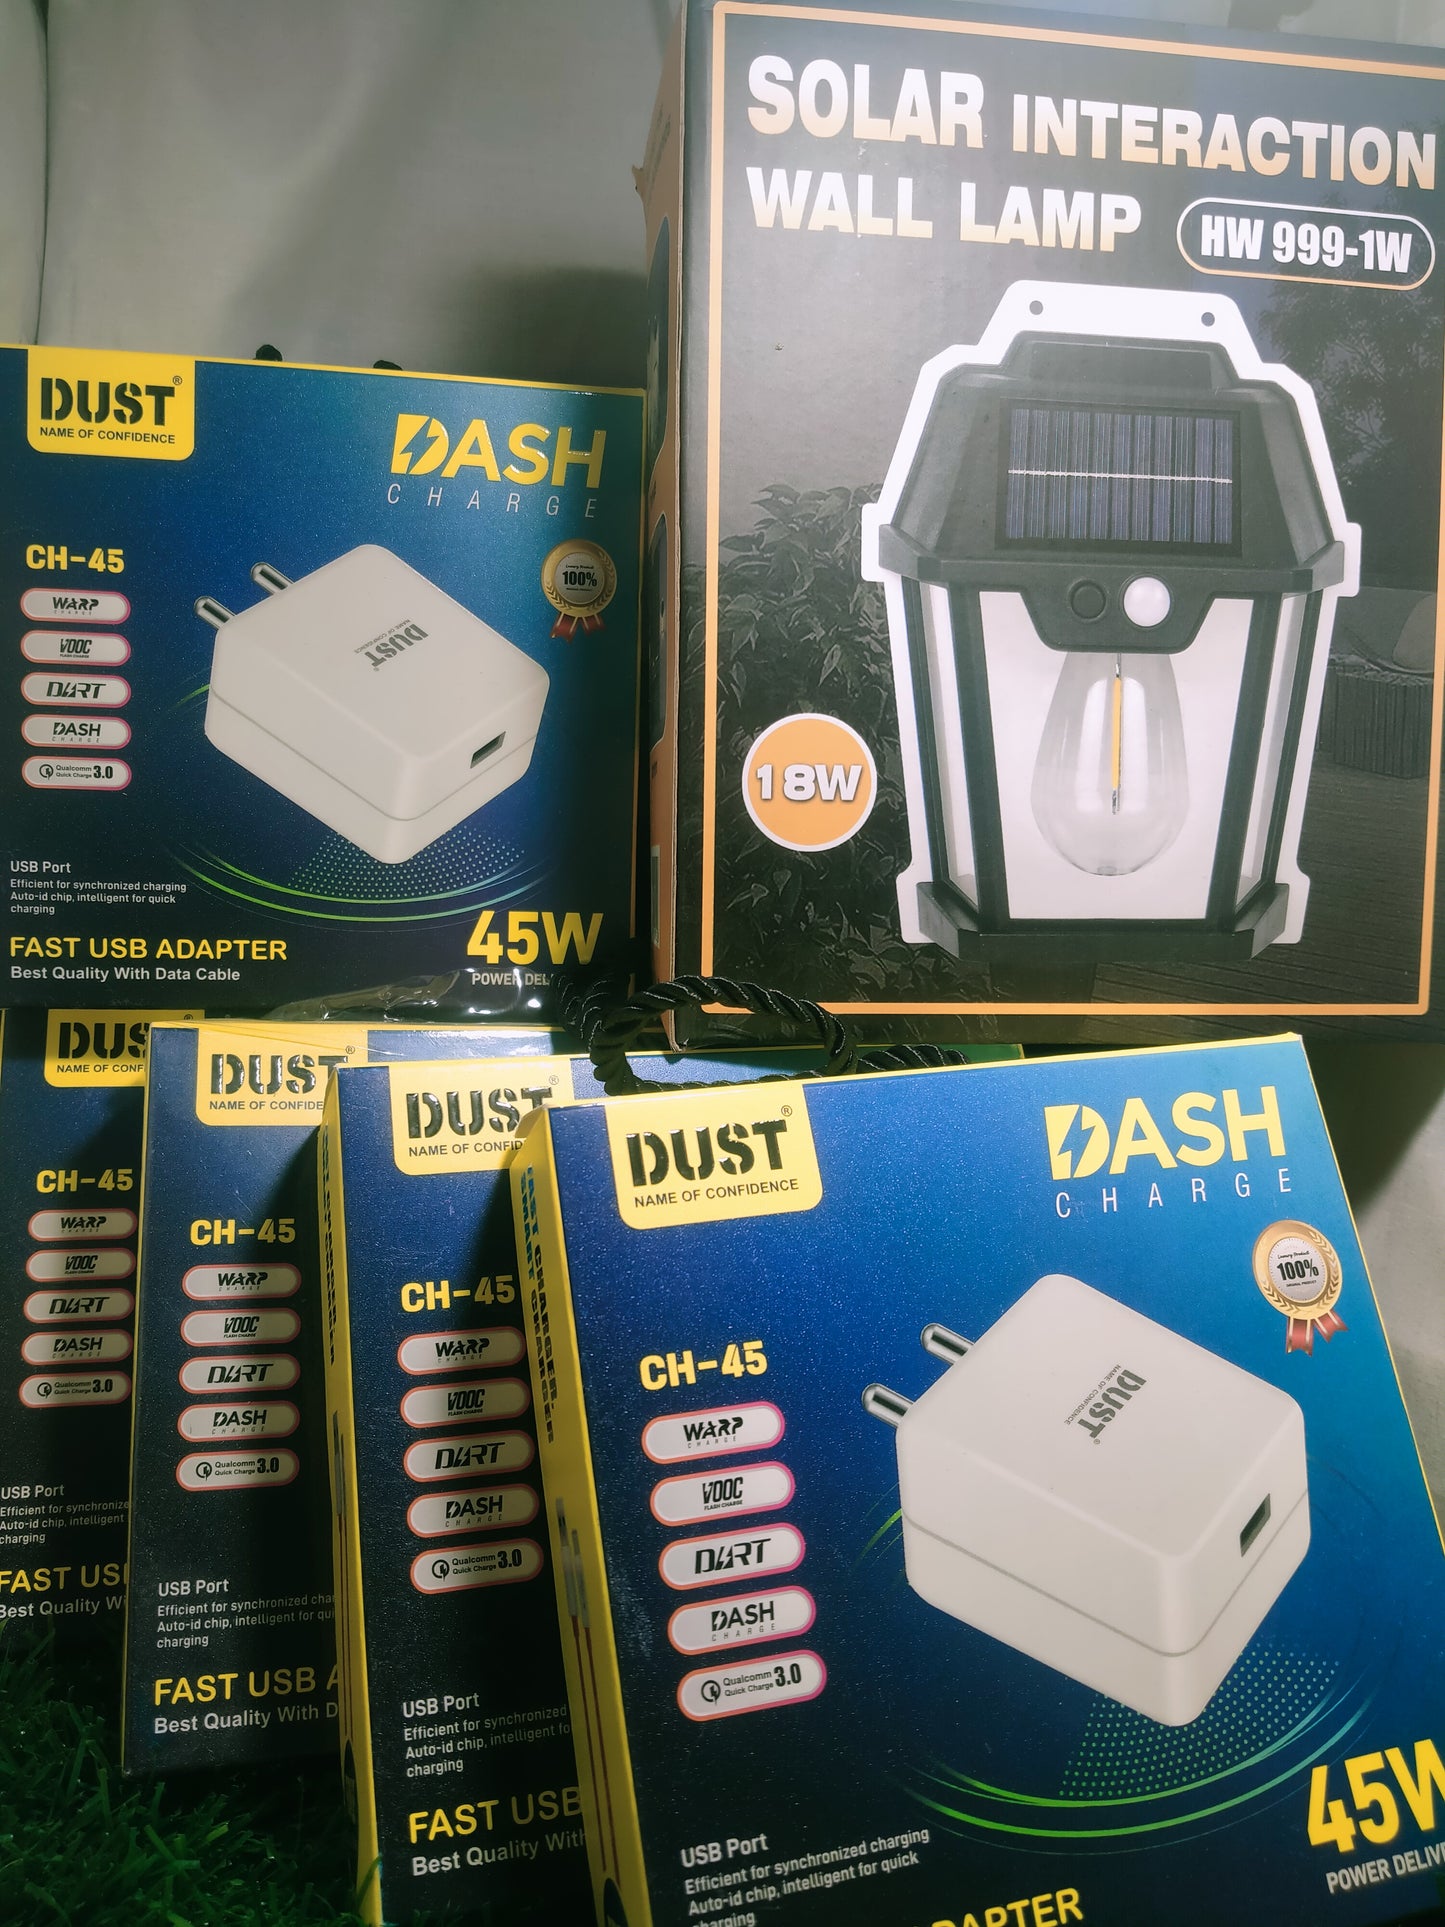 DUST CH-45 Dash 45W/ Type C Charger/1 solar lamp free on 5 piece purchase